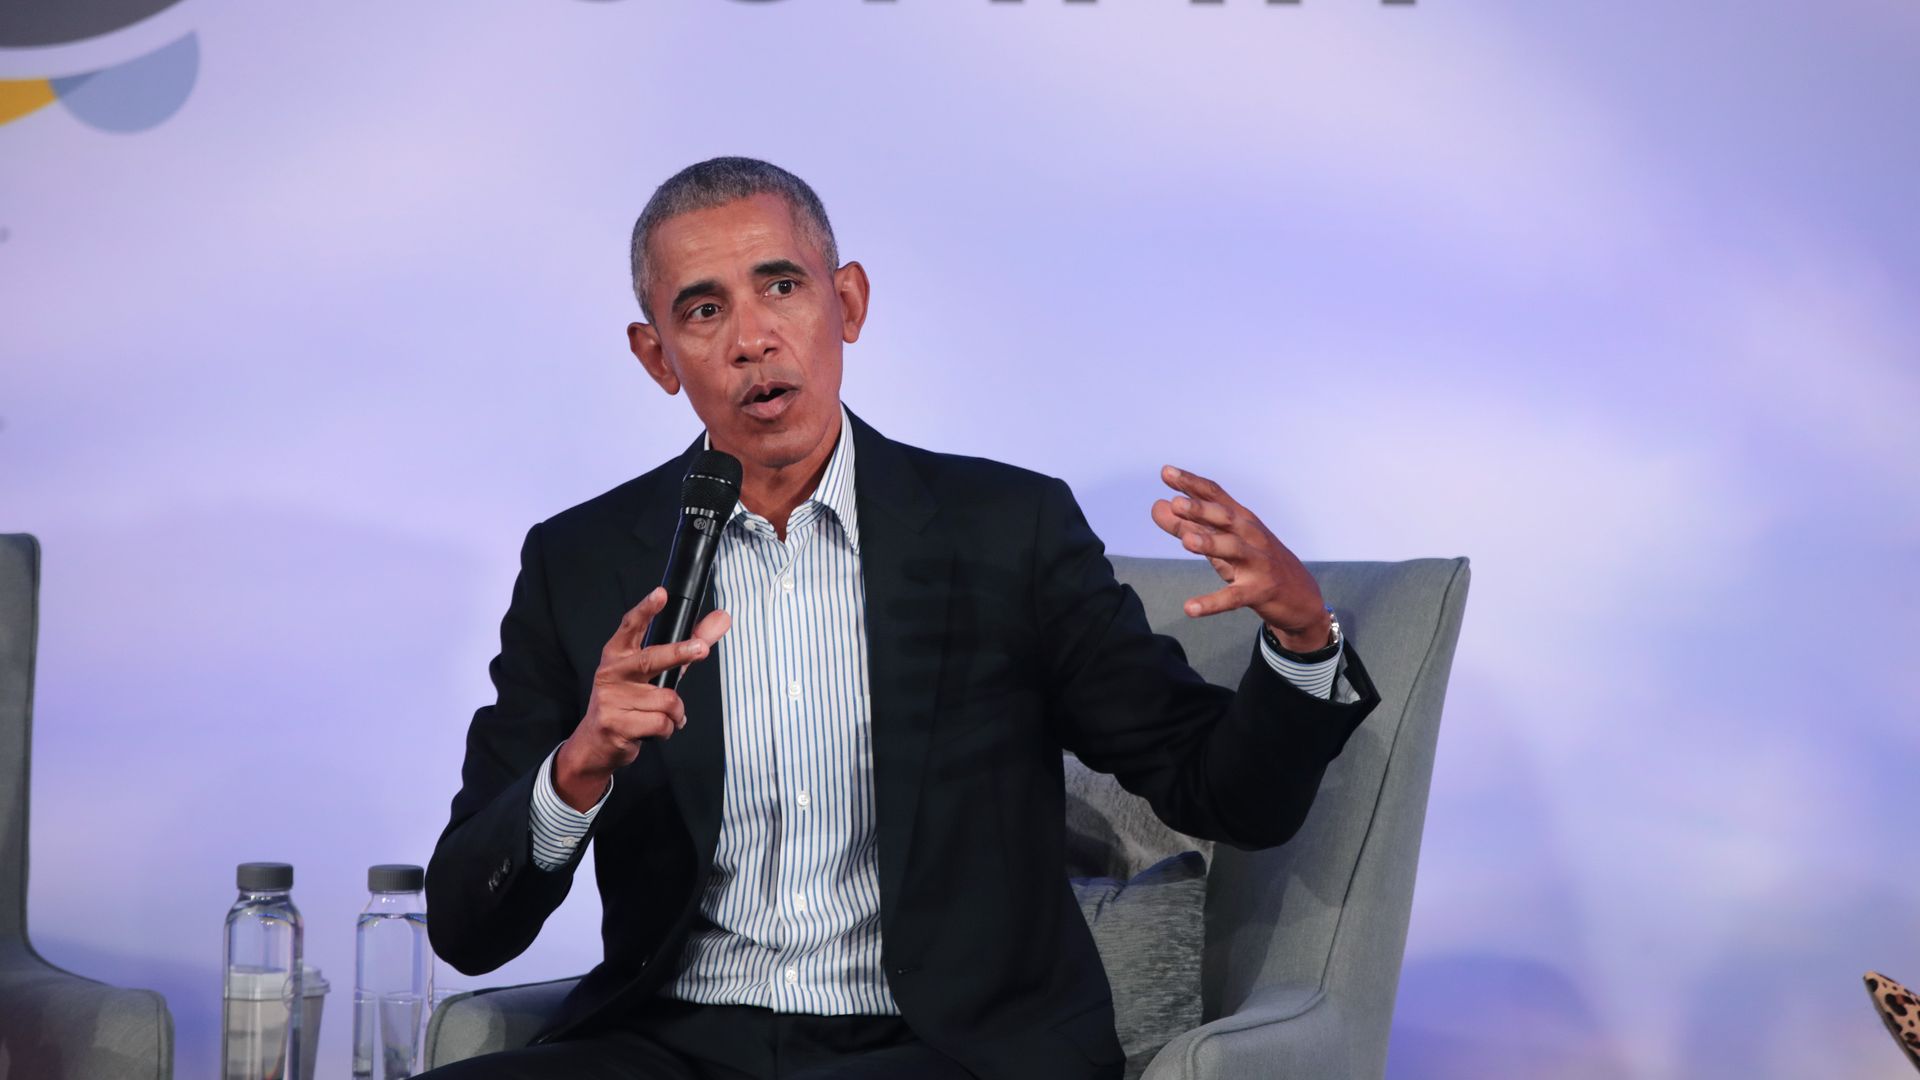 Former U.S. President Barack Obama speaks to guests at the Obama Foundation Summit on the campus of the Illinois Institute of Technology on October 29, 2019 in Chicago, Illinois. 